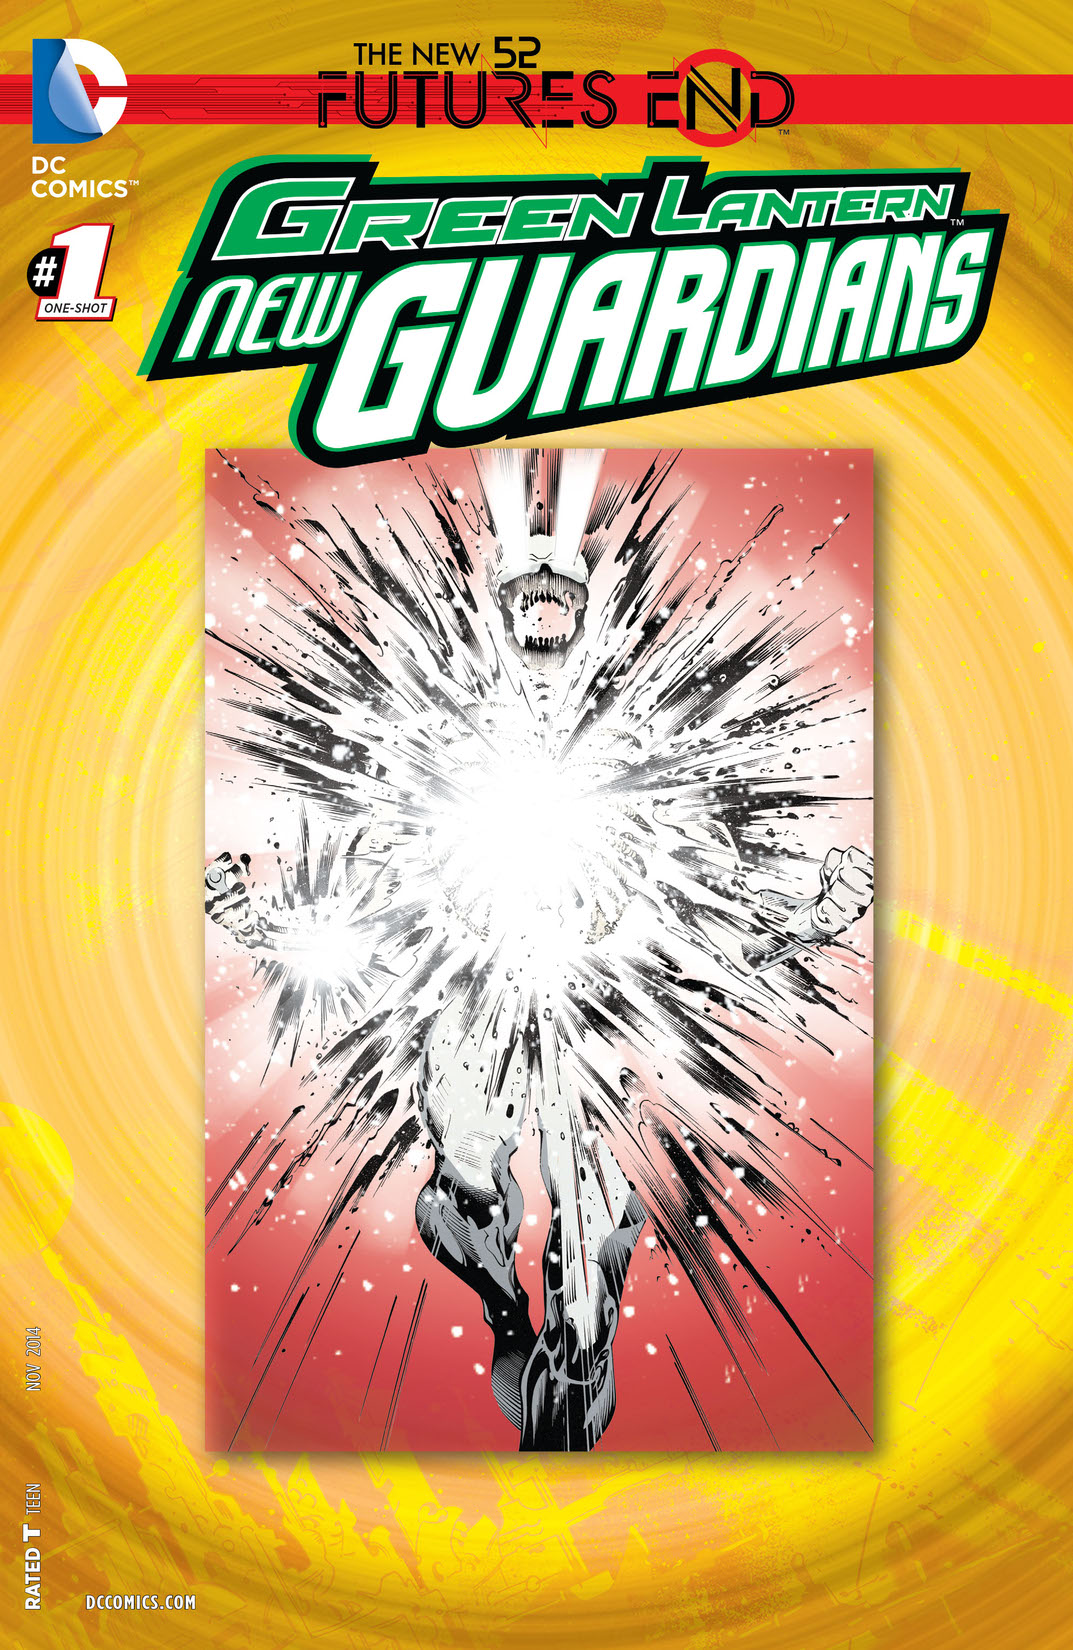 Green Lantern: New Guardians: Futures End #1 preview images